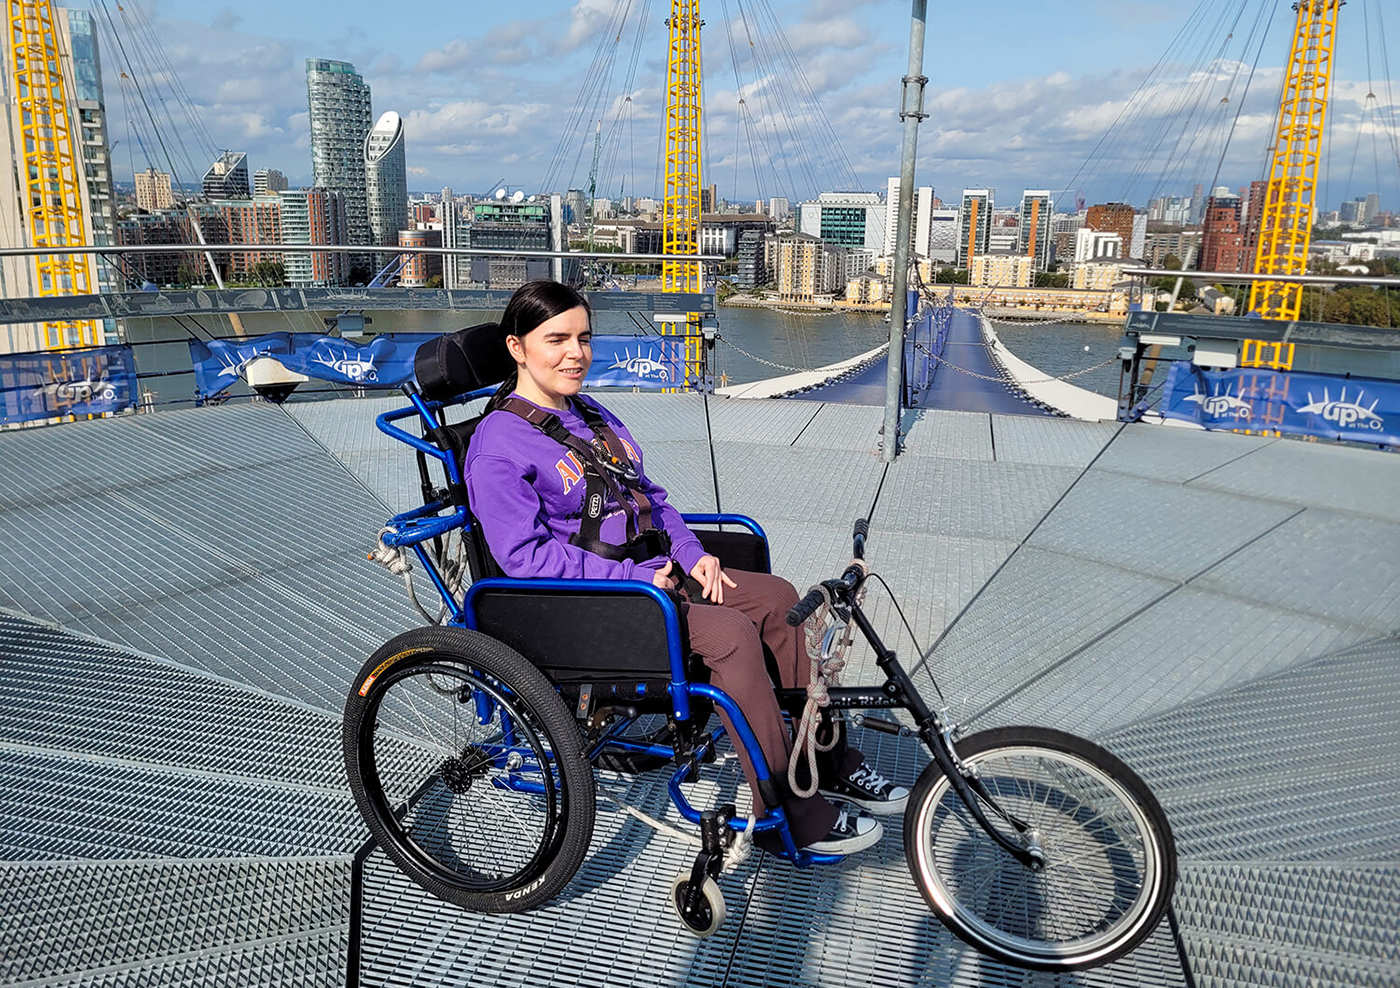 Emma is sitting in a manual wheelchair provided by Up at the O2 for the purpose of her O2 wheelchair climb. She is on the summit of the O2 roof with a spectacular view around her. Emma is wearing a purple sweatshirt and brown flared leggings. Emma is smiling.